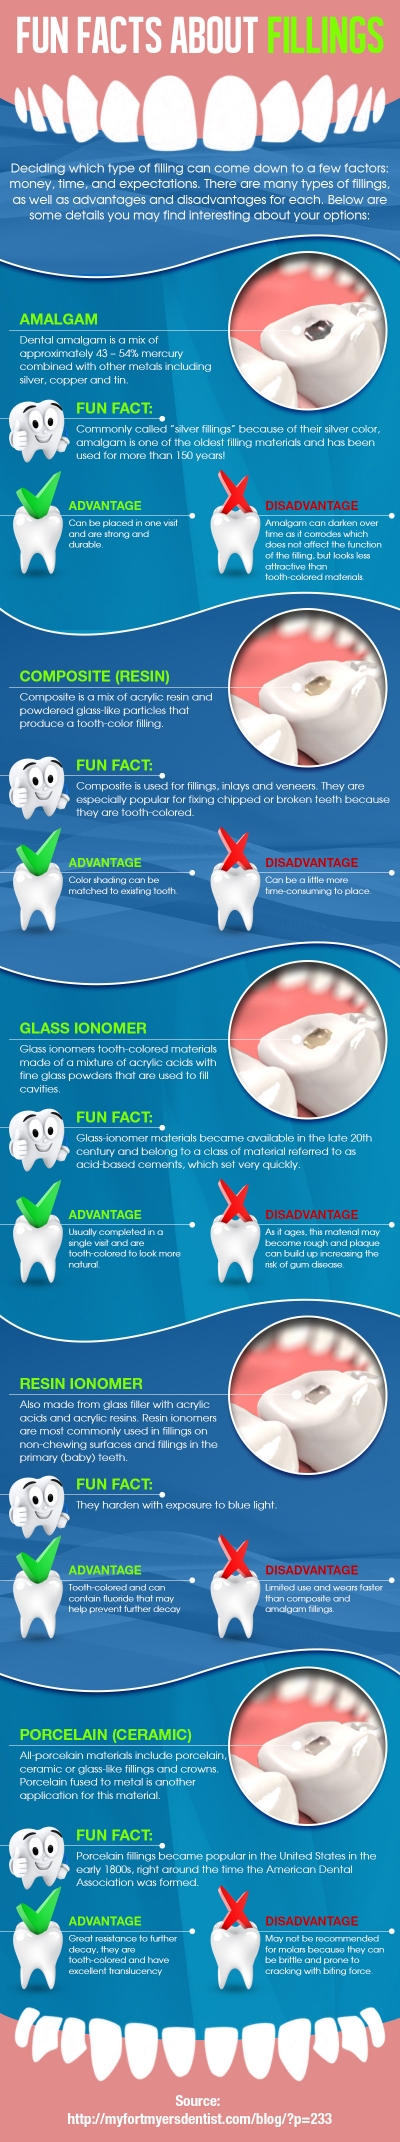 Fun Facts About Fillings - Dental Infographic